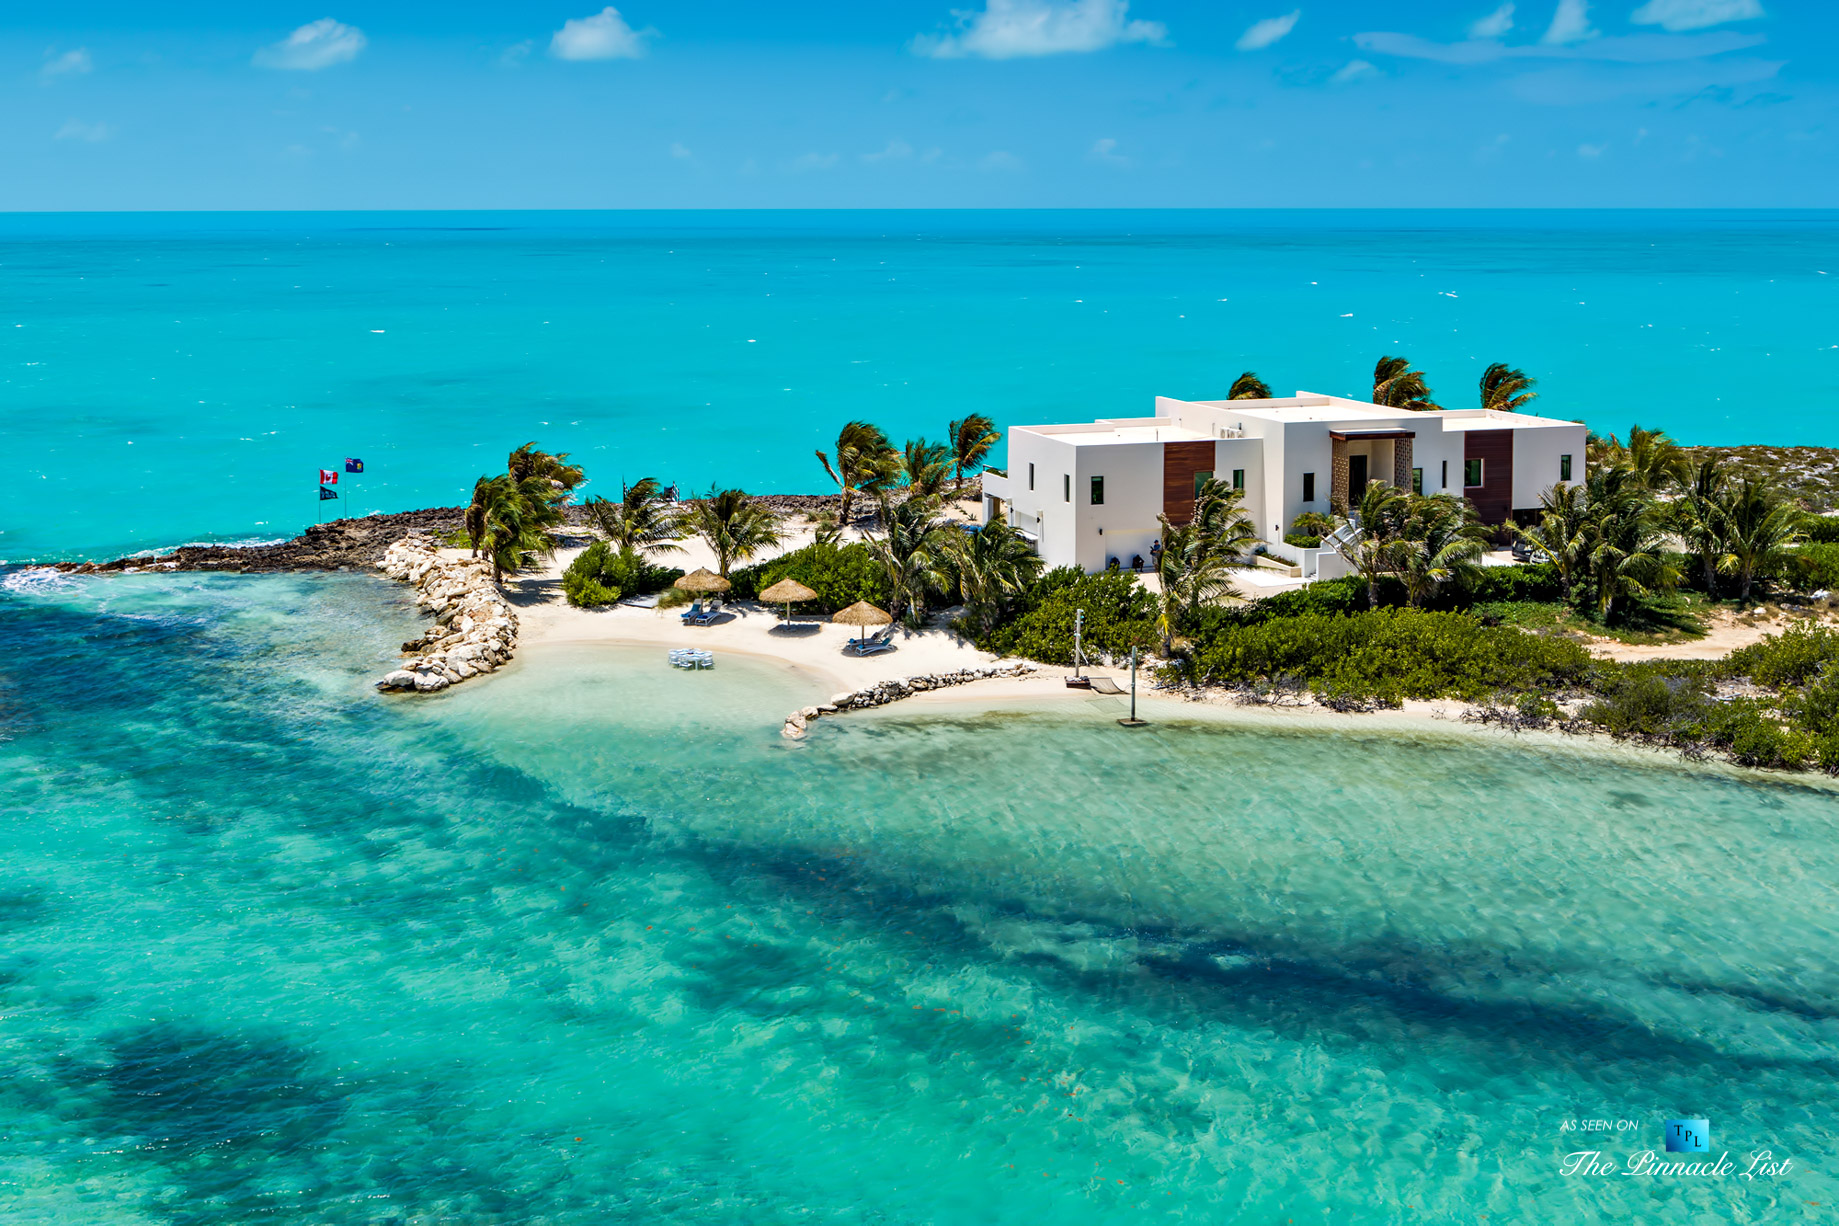 Tip of the Tail Villa - Providenciales, Turks and Caicos Islands - Luxury Real Estate - South Shore Peninsula Home